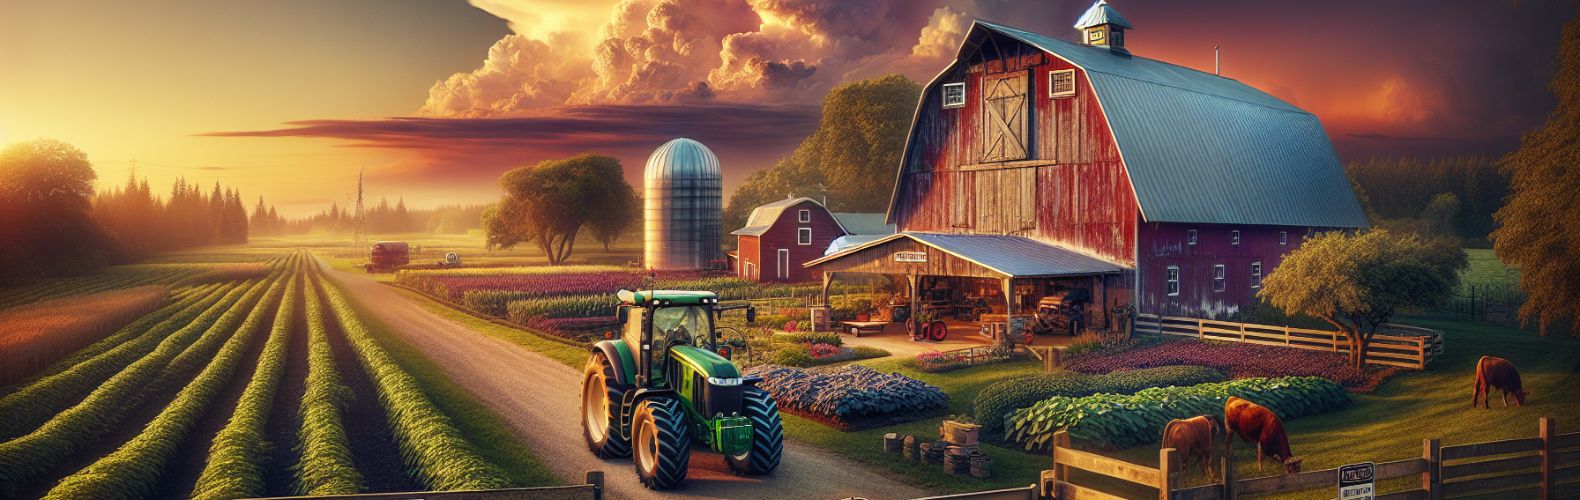 Illustration of a farm generated by AI